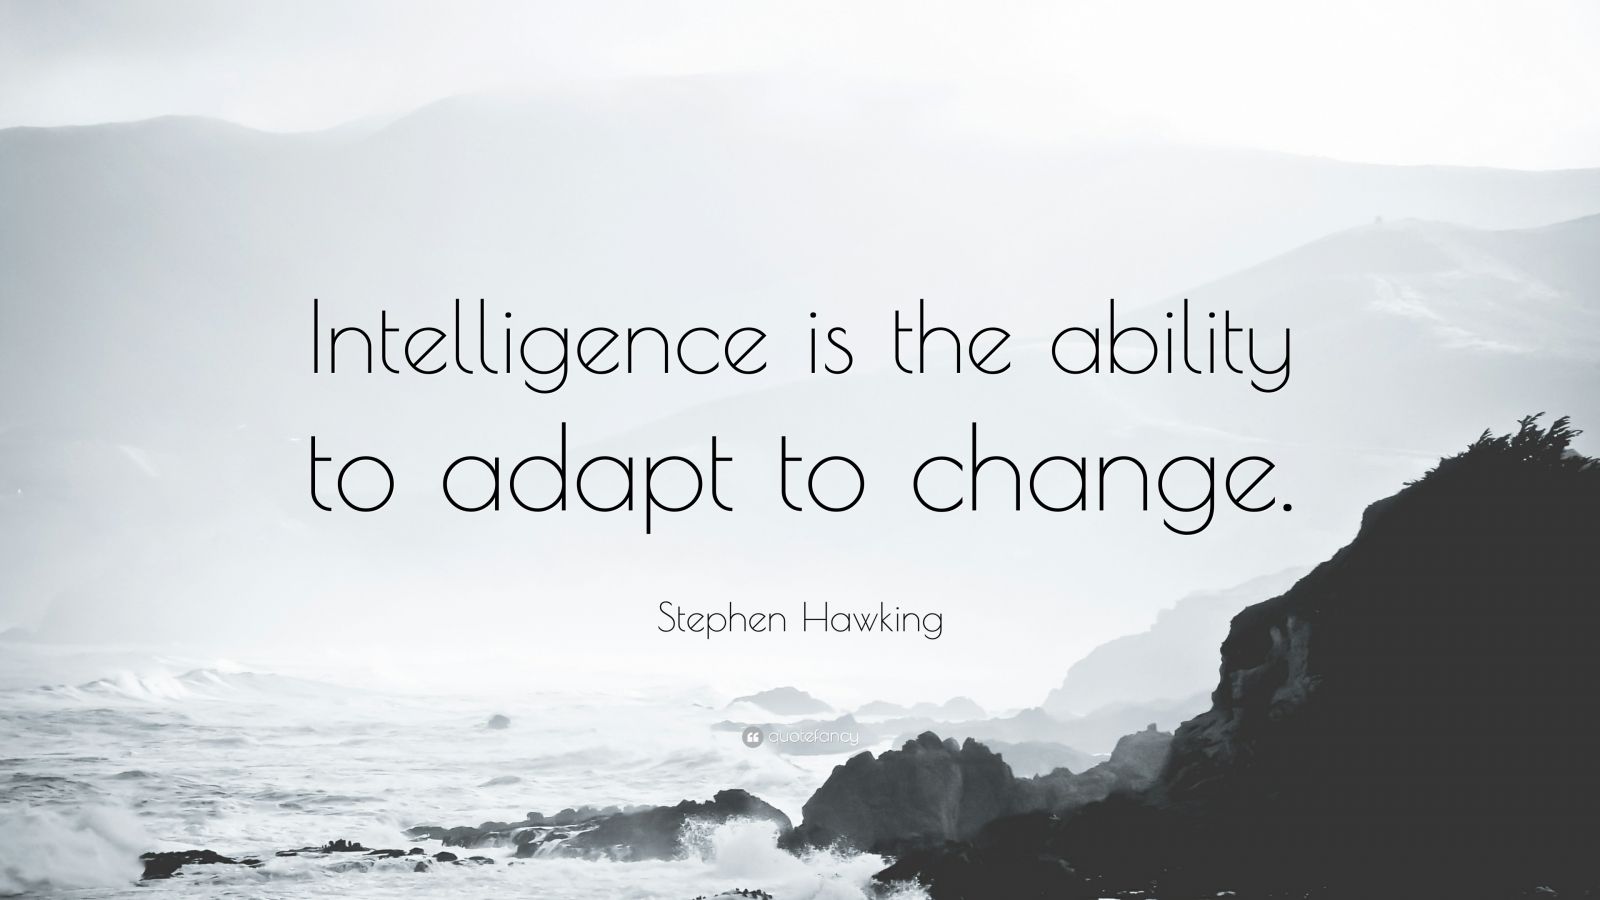 Stephen Hawking Quote: “Intelligence is the ability to adapt to change